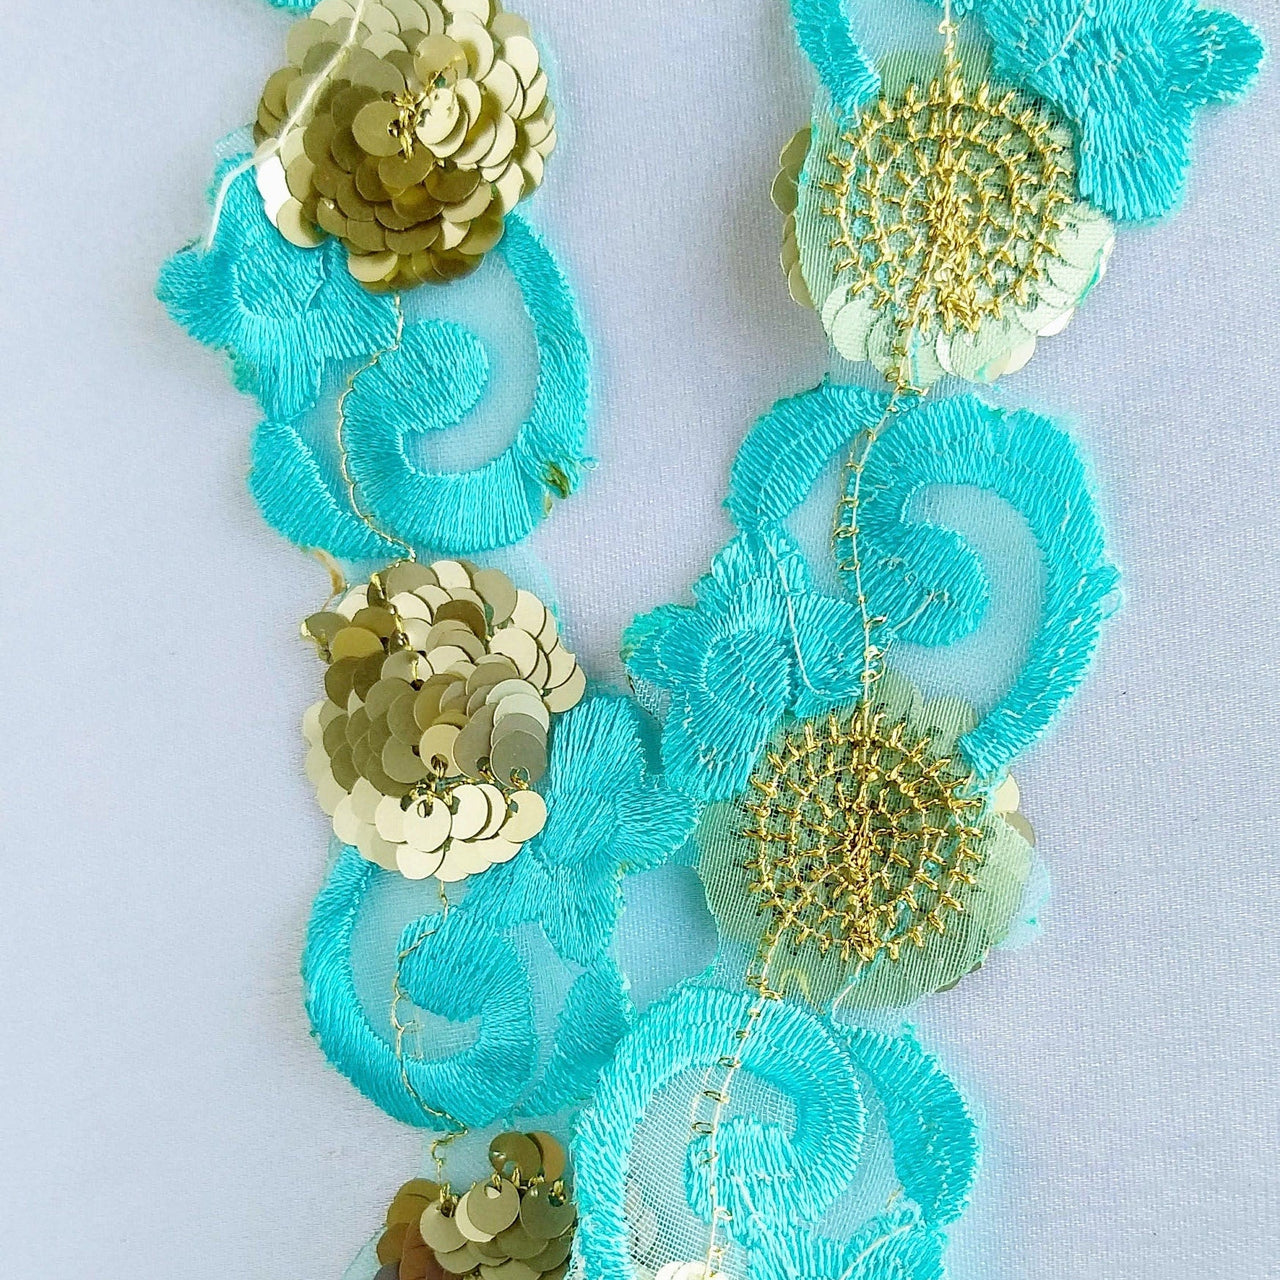 Blue Lace Trim, Tissue Fabric Cutwork With Floral Embroidery & Gold Sequins, Indian Embroidery 